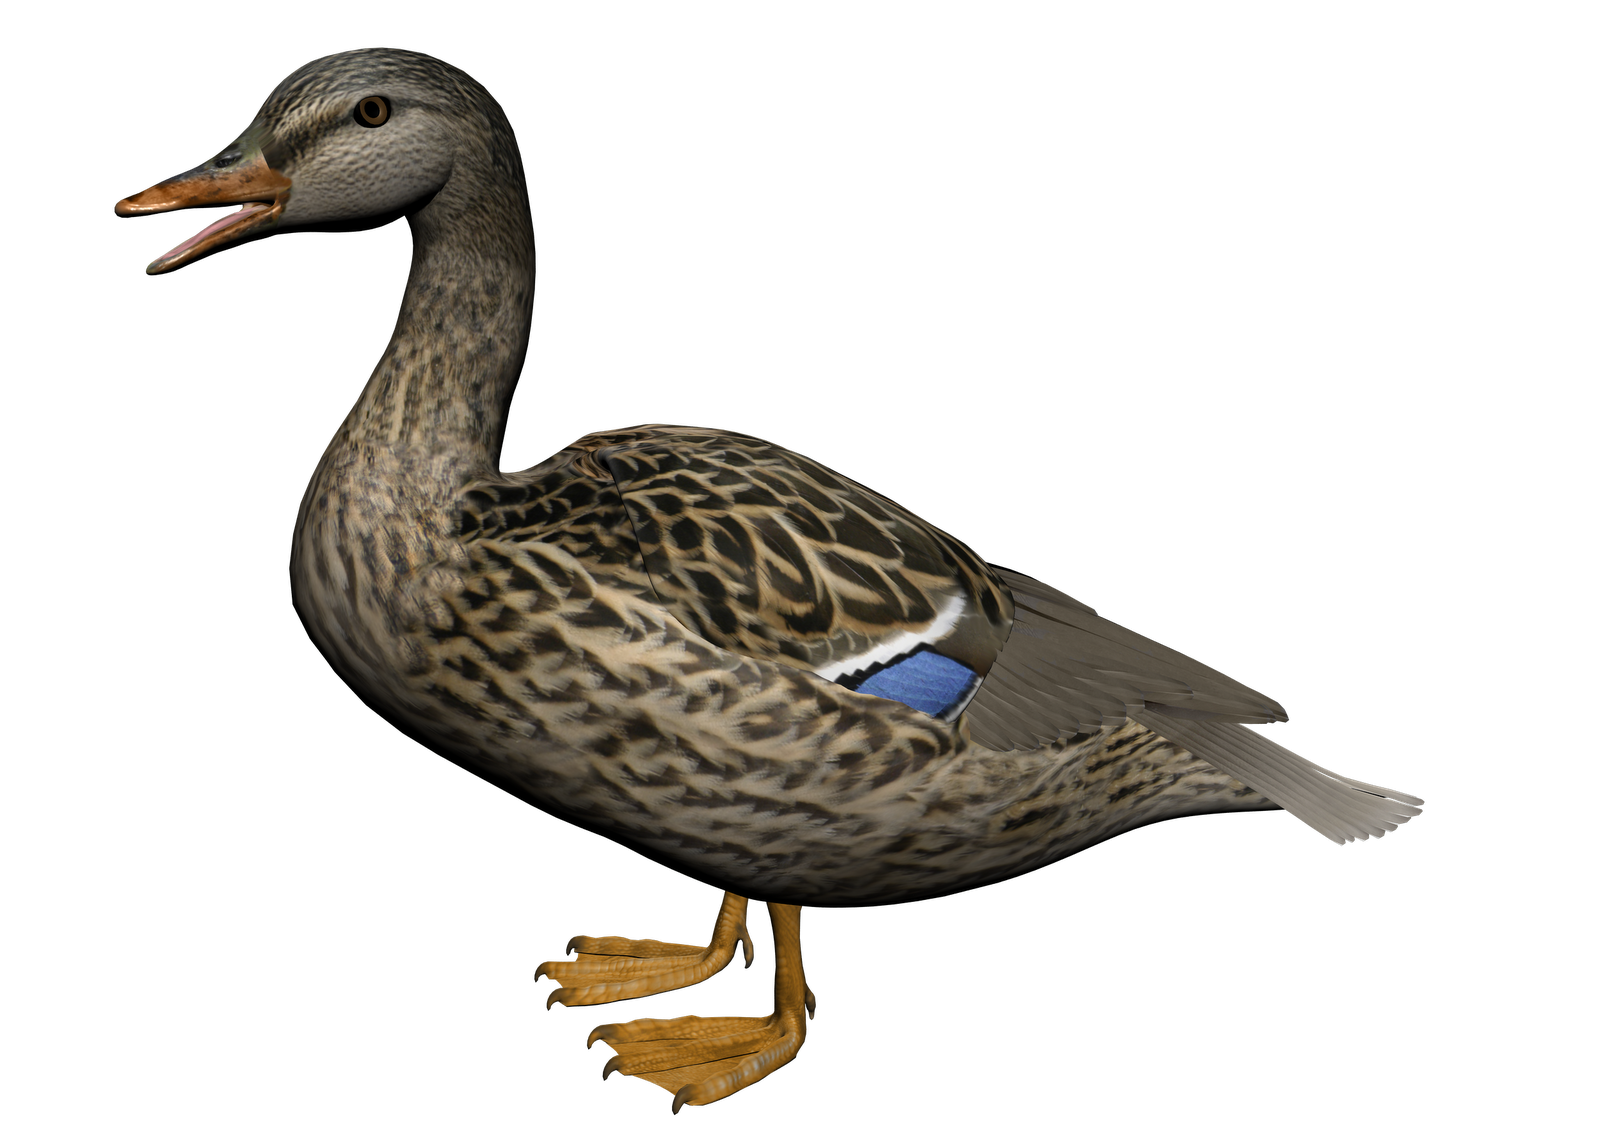 Hd Duck Image In Our System